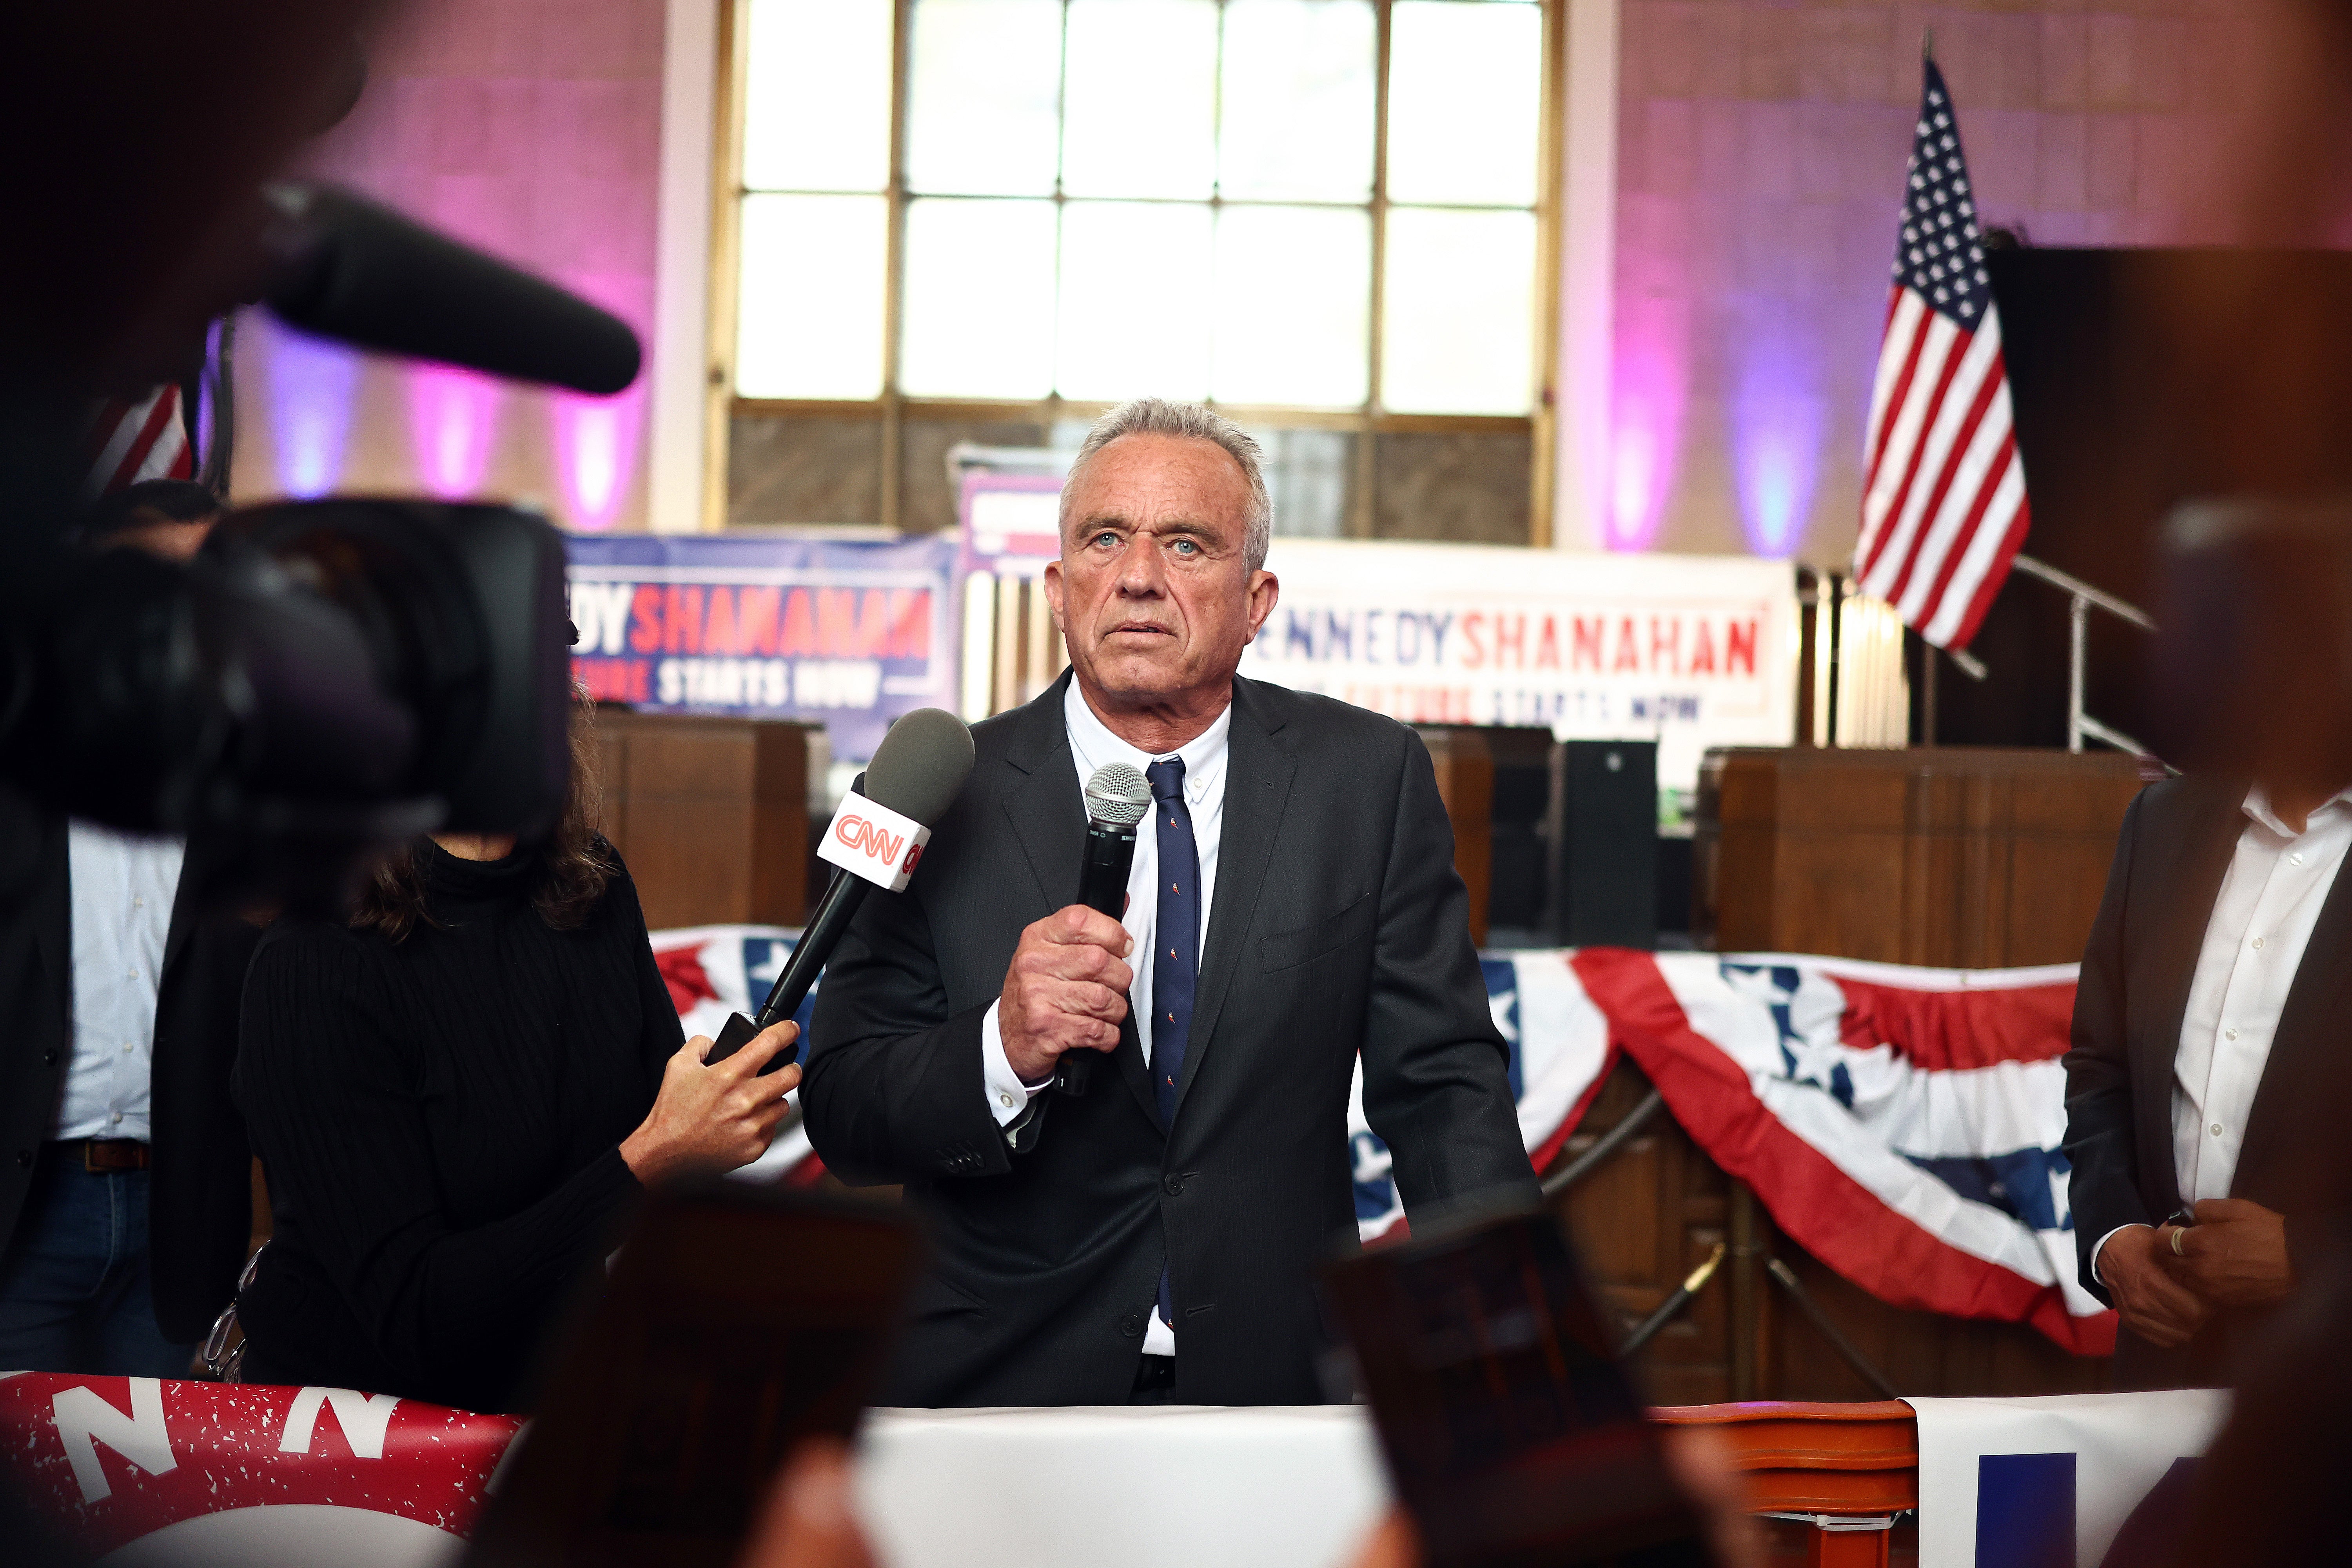 Independent presidential candidate Robert F. Kennedy Jr. speaks to the media at a Cesar Chavez Day event at Union Station on March 30 2024 in Los Angeles, California